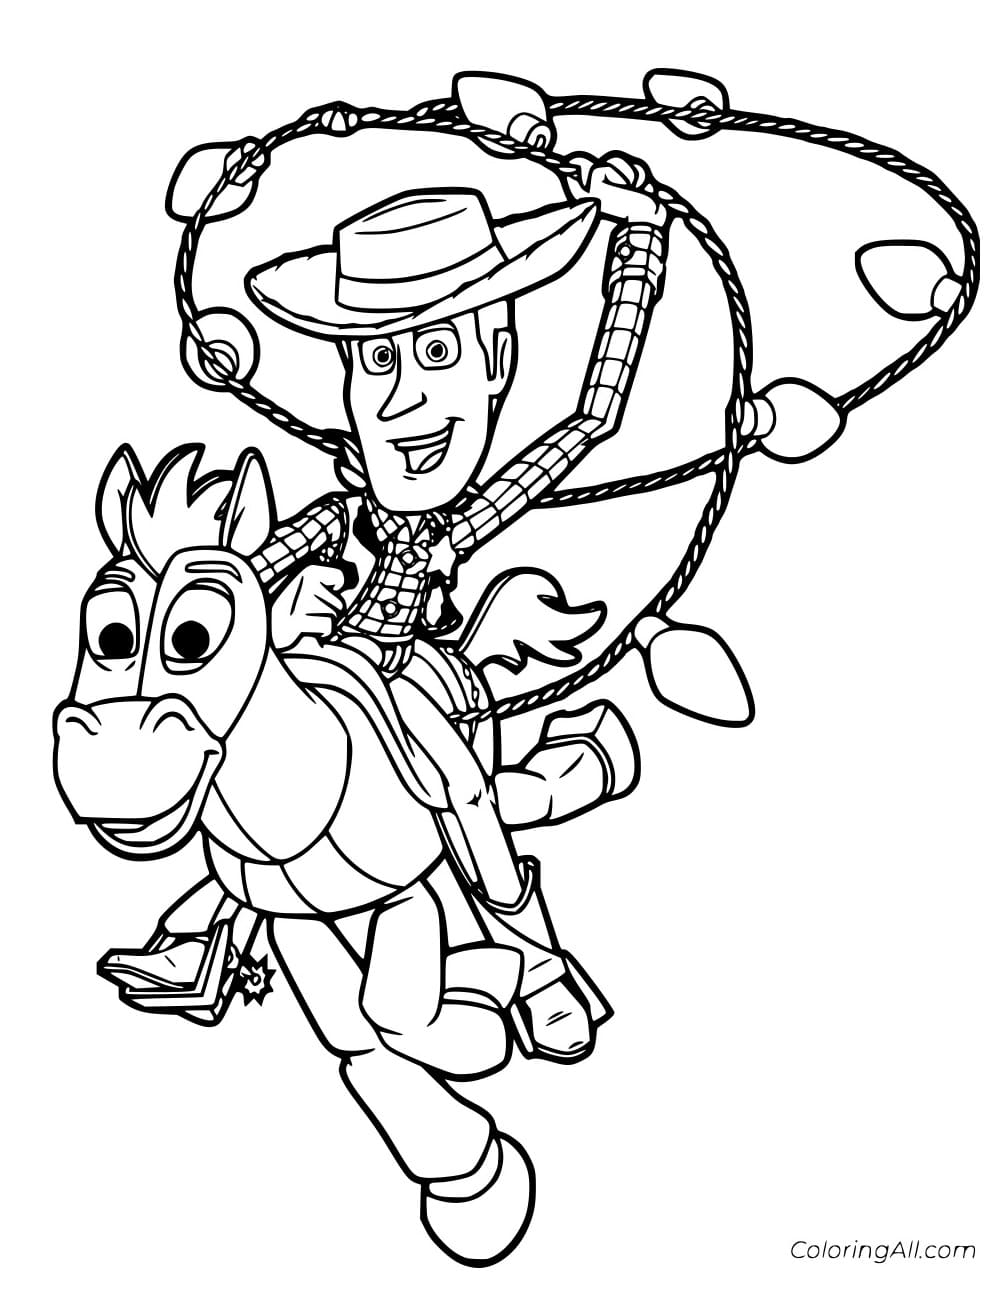 Woody Holds Bulbs Coloring Page